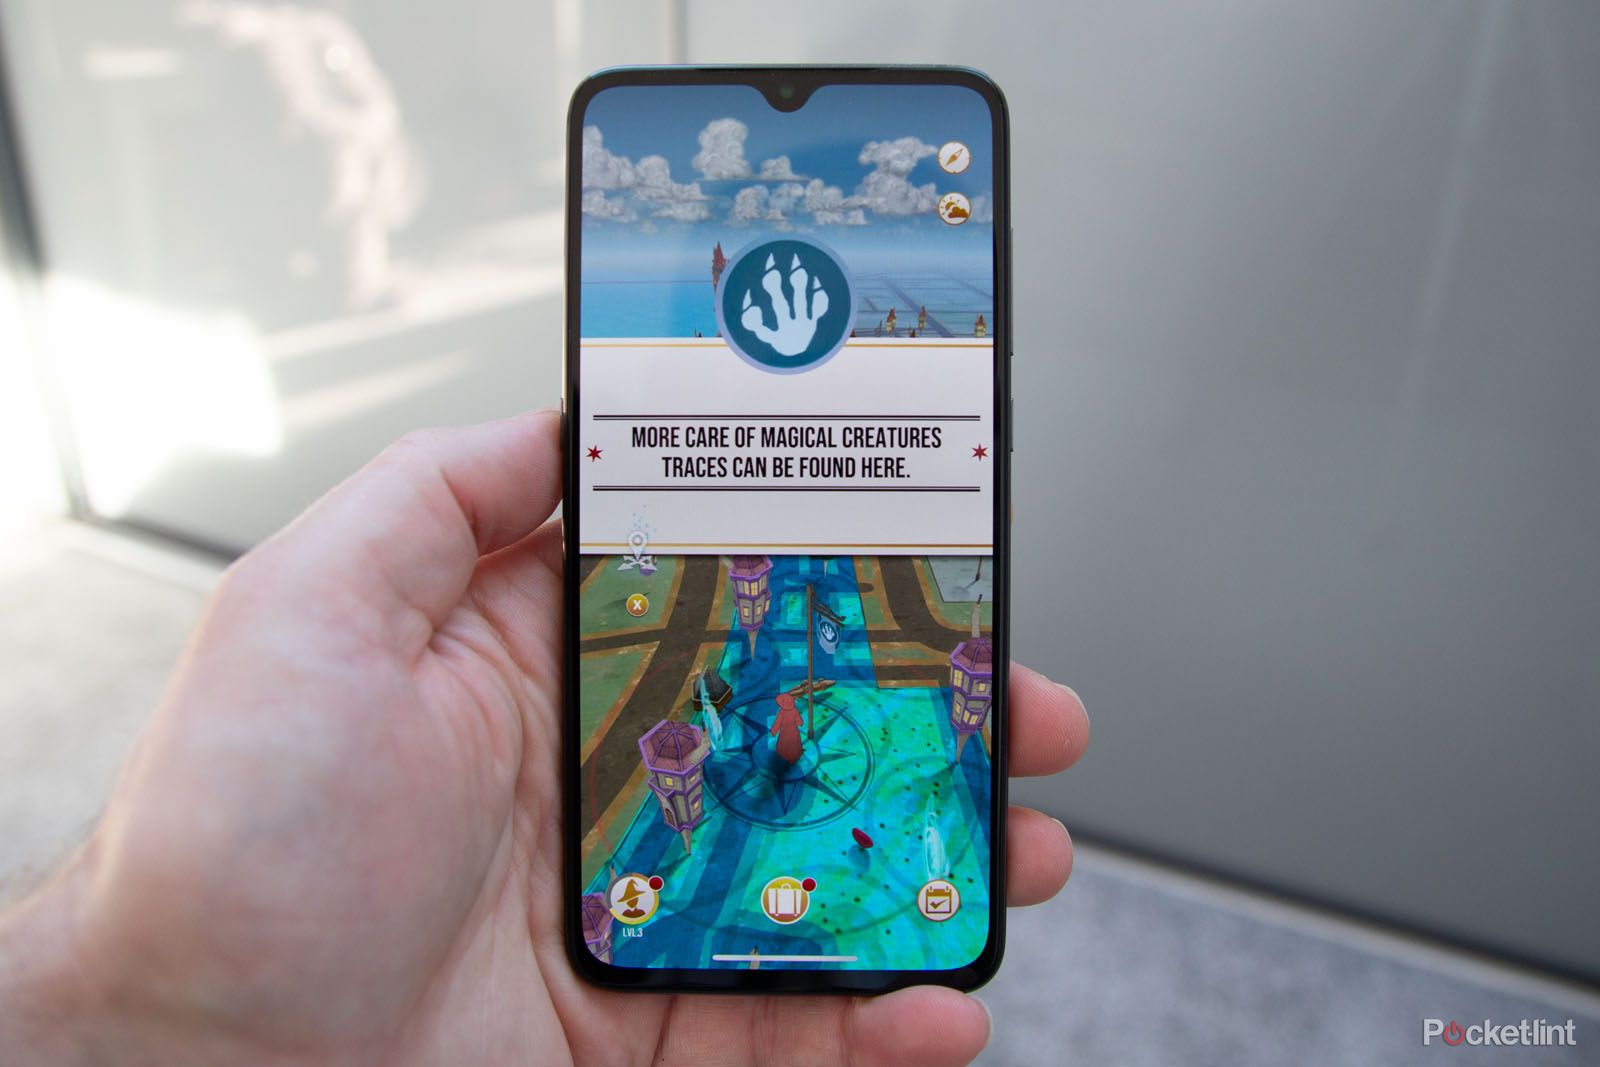 Wizards Unite will exclusively launch on EE in the UK Niantic confirms image 1